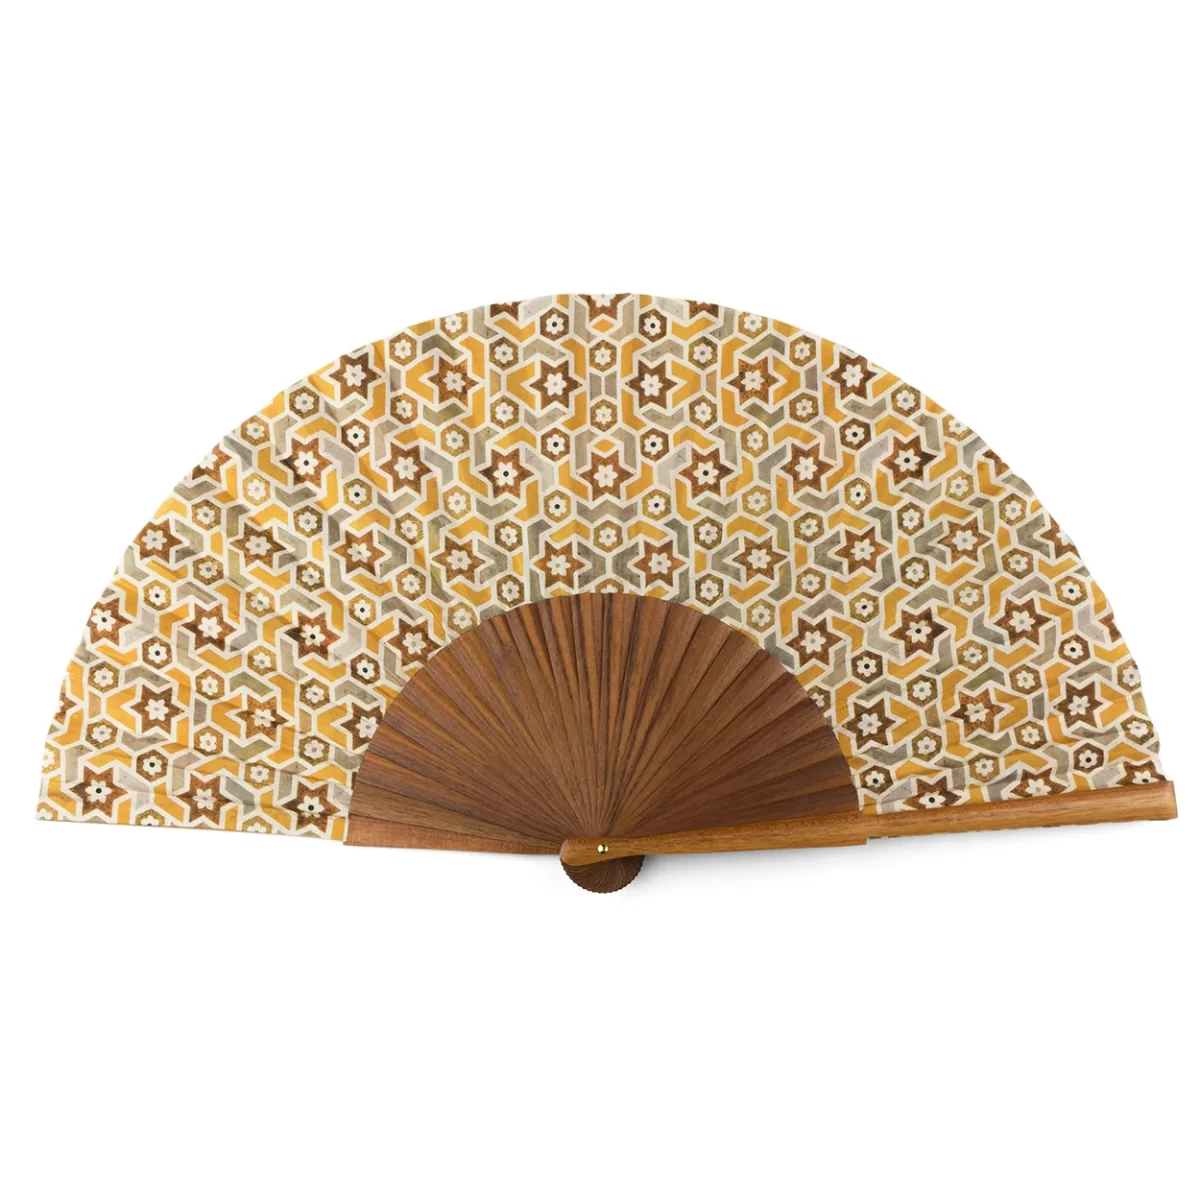 Silk fan with brown tones inspired by Moroccan geometries.